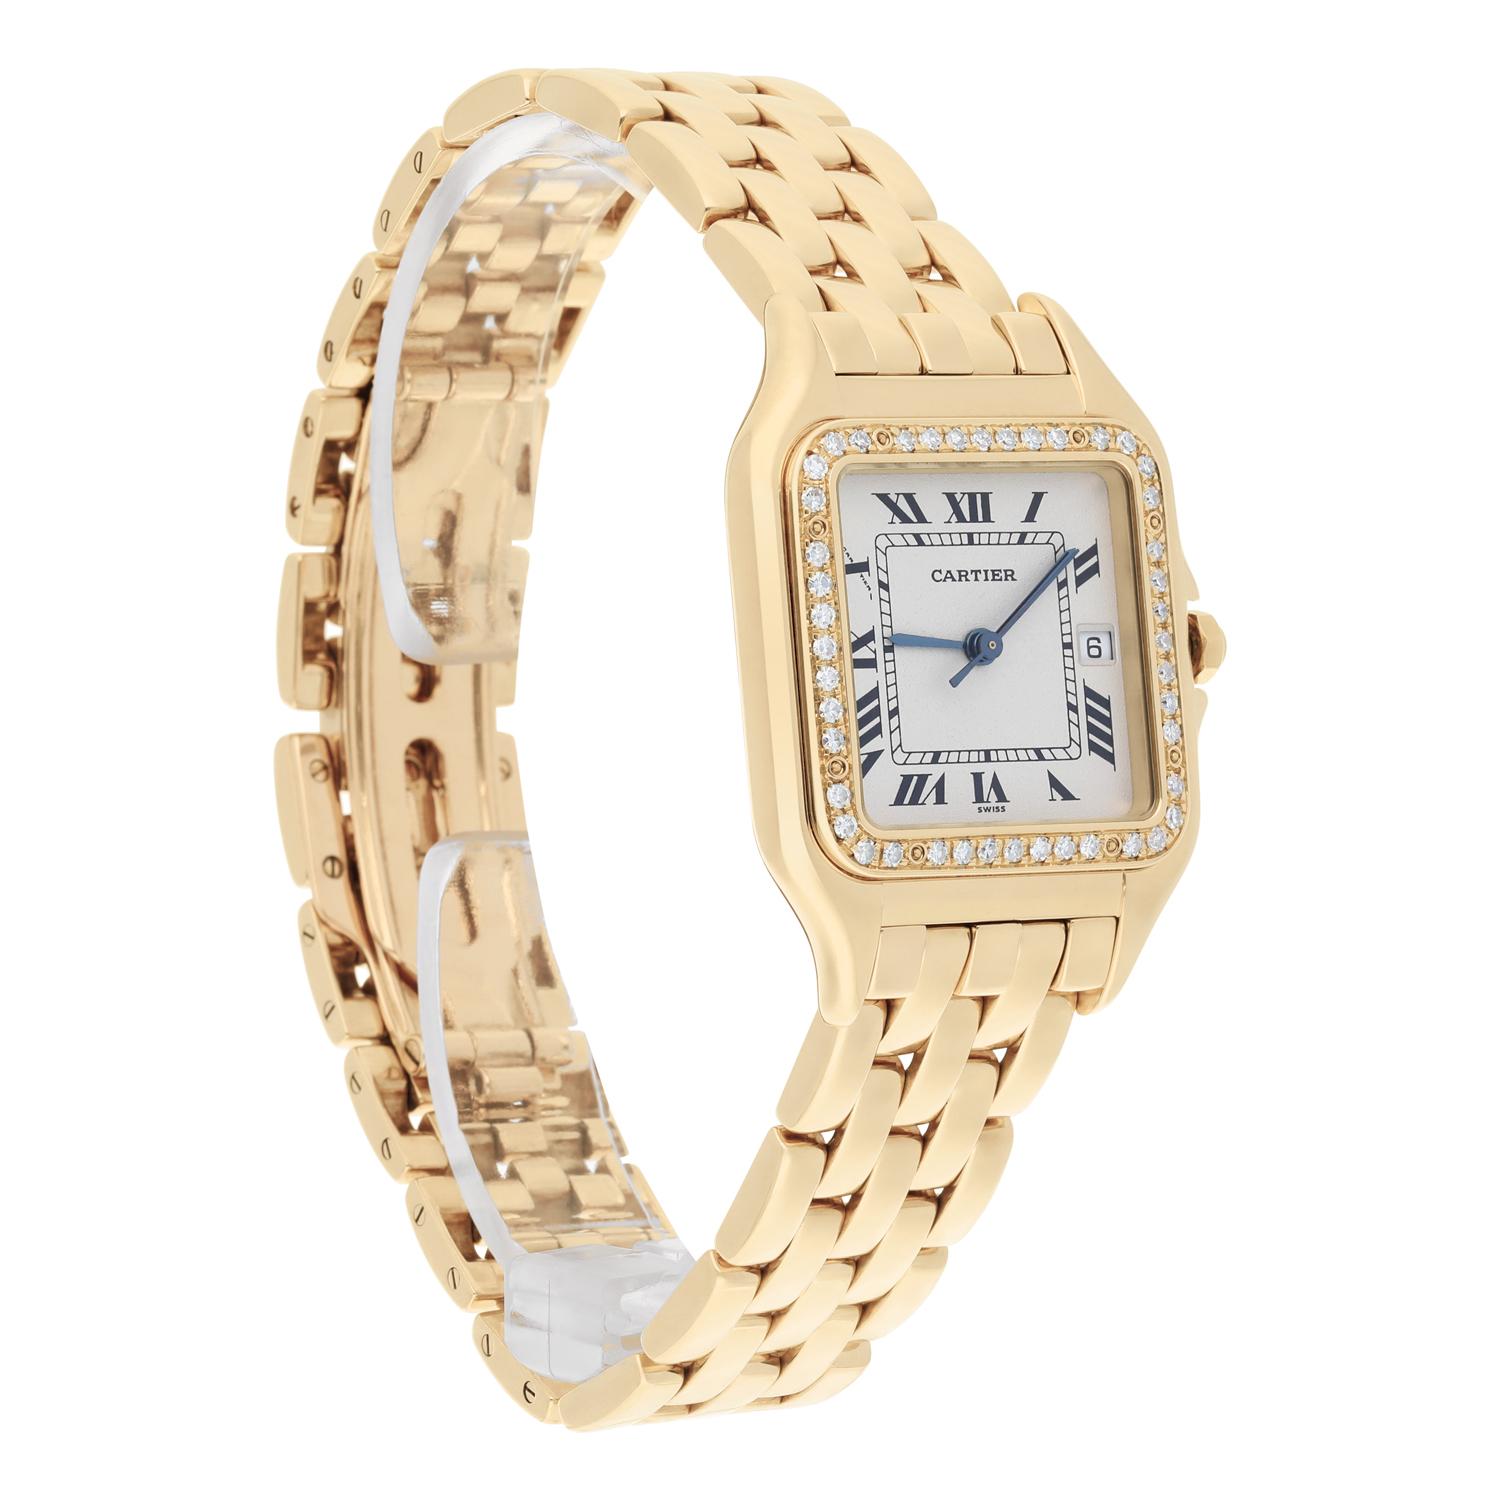 Cartier Panthere 29mm Ladies Large 18K Yellow Gold Watch with Diamonds 887968 For Sale 1